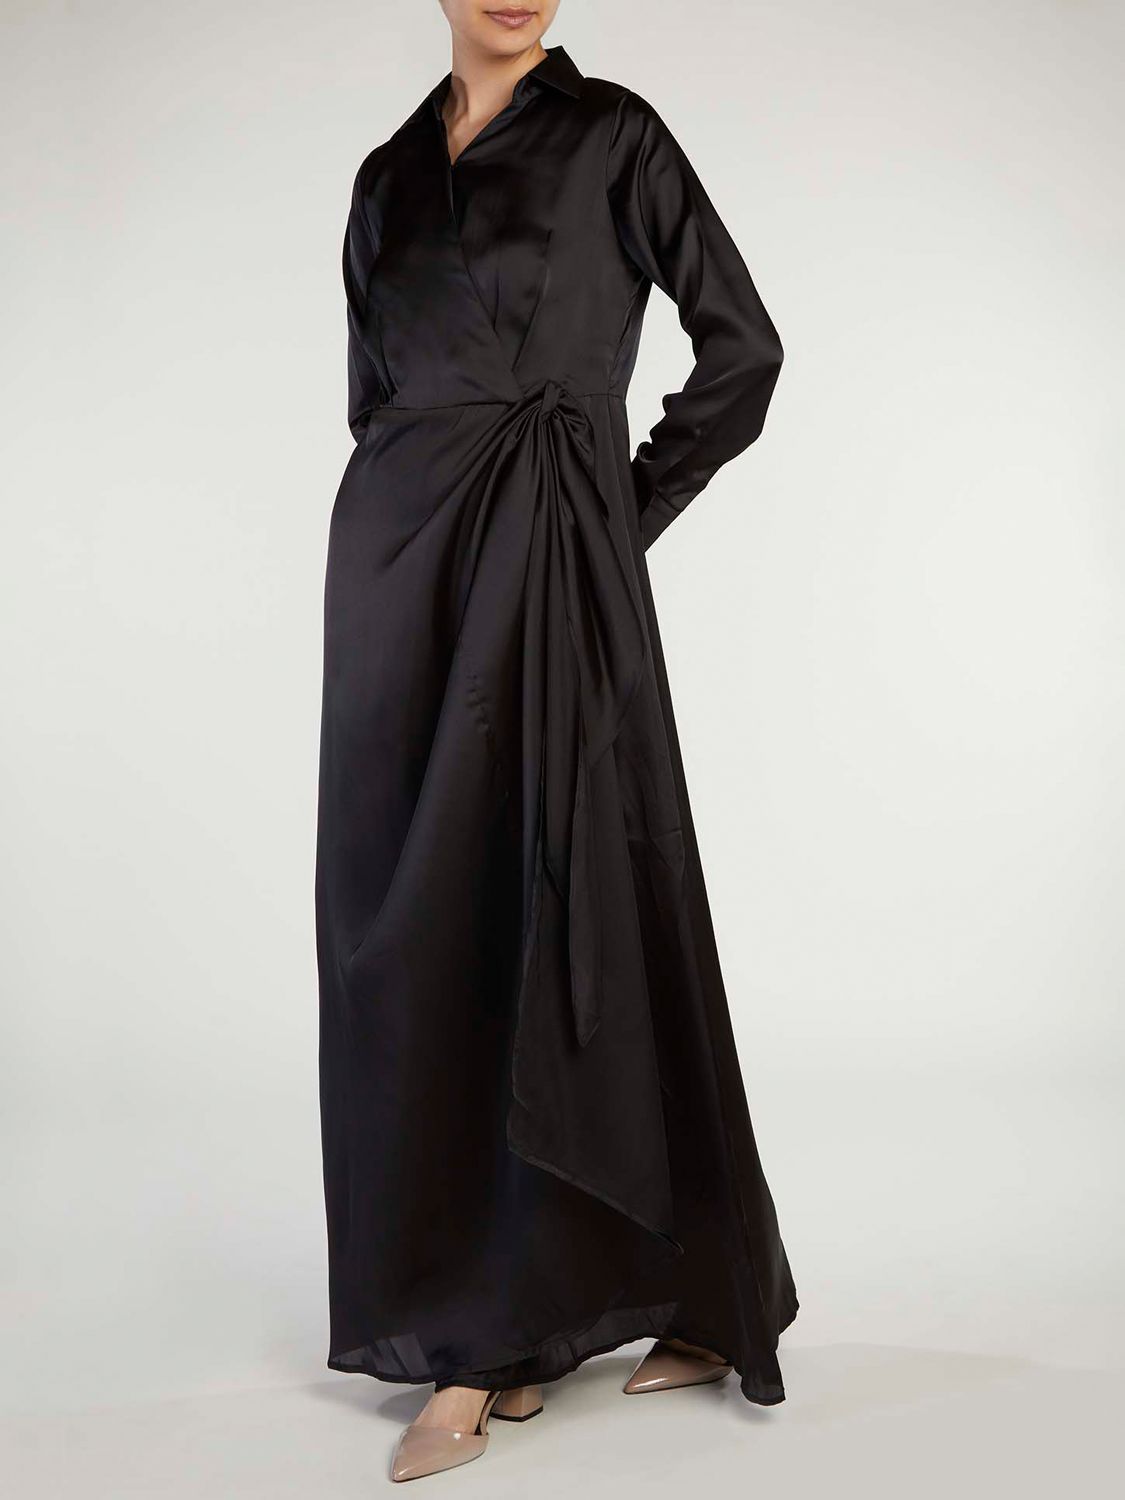 Covered By Love Black Maxi Dress